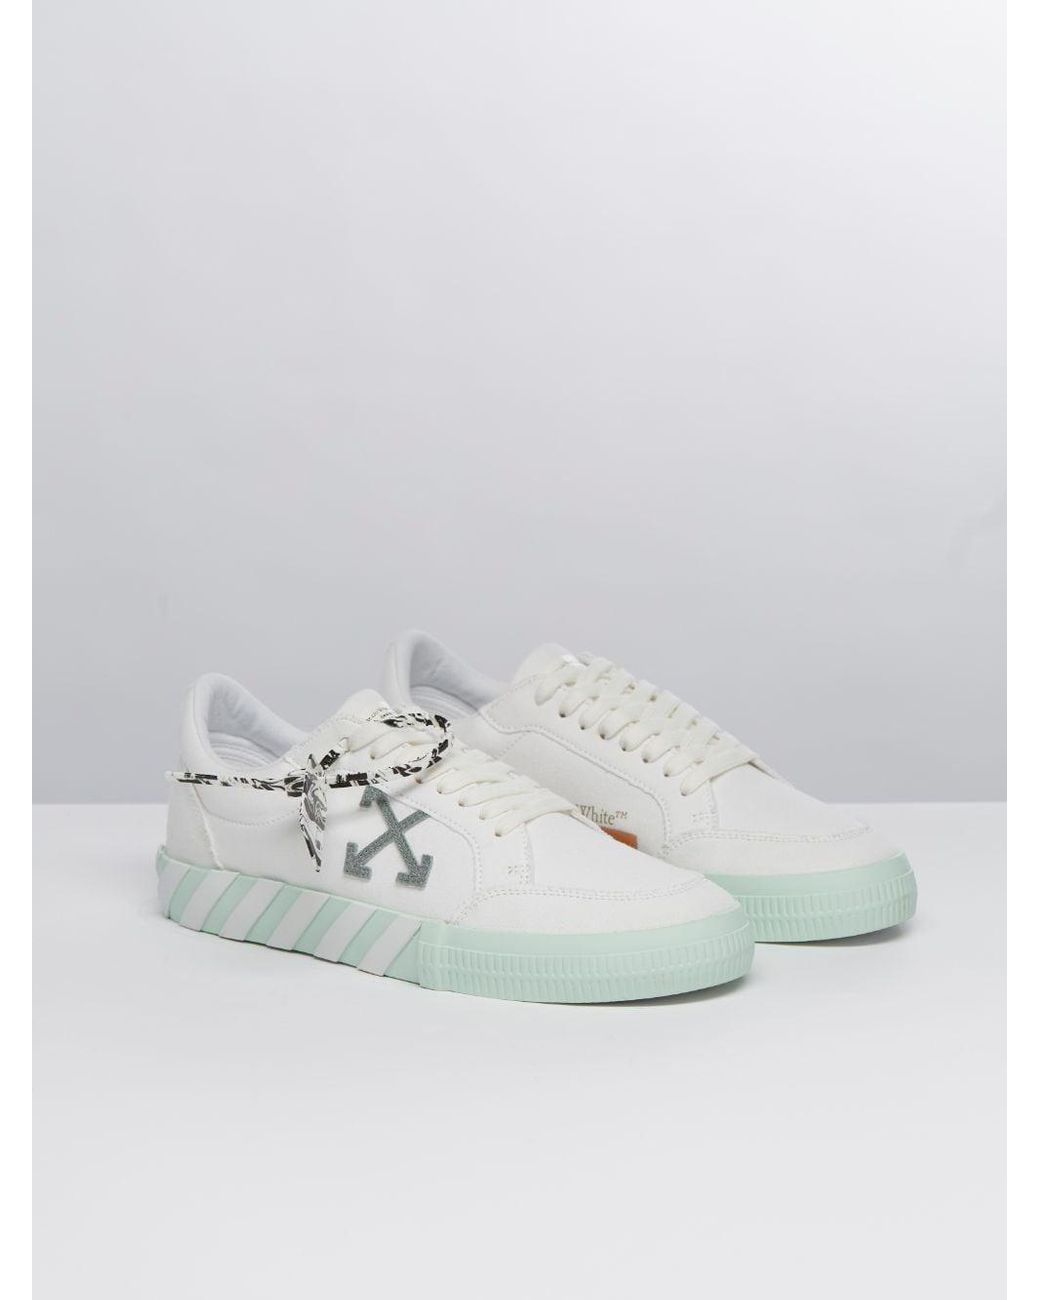 Off White Virgil Abloh Sneakers for Sale in Zion, IL - OfferUp